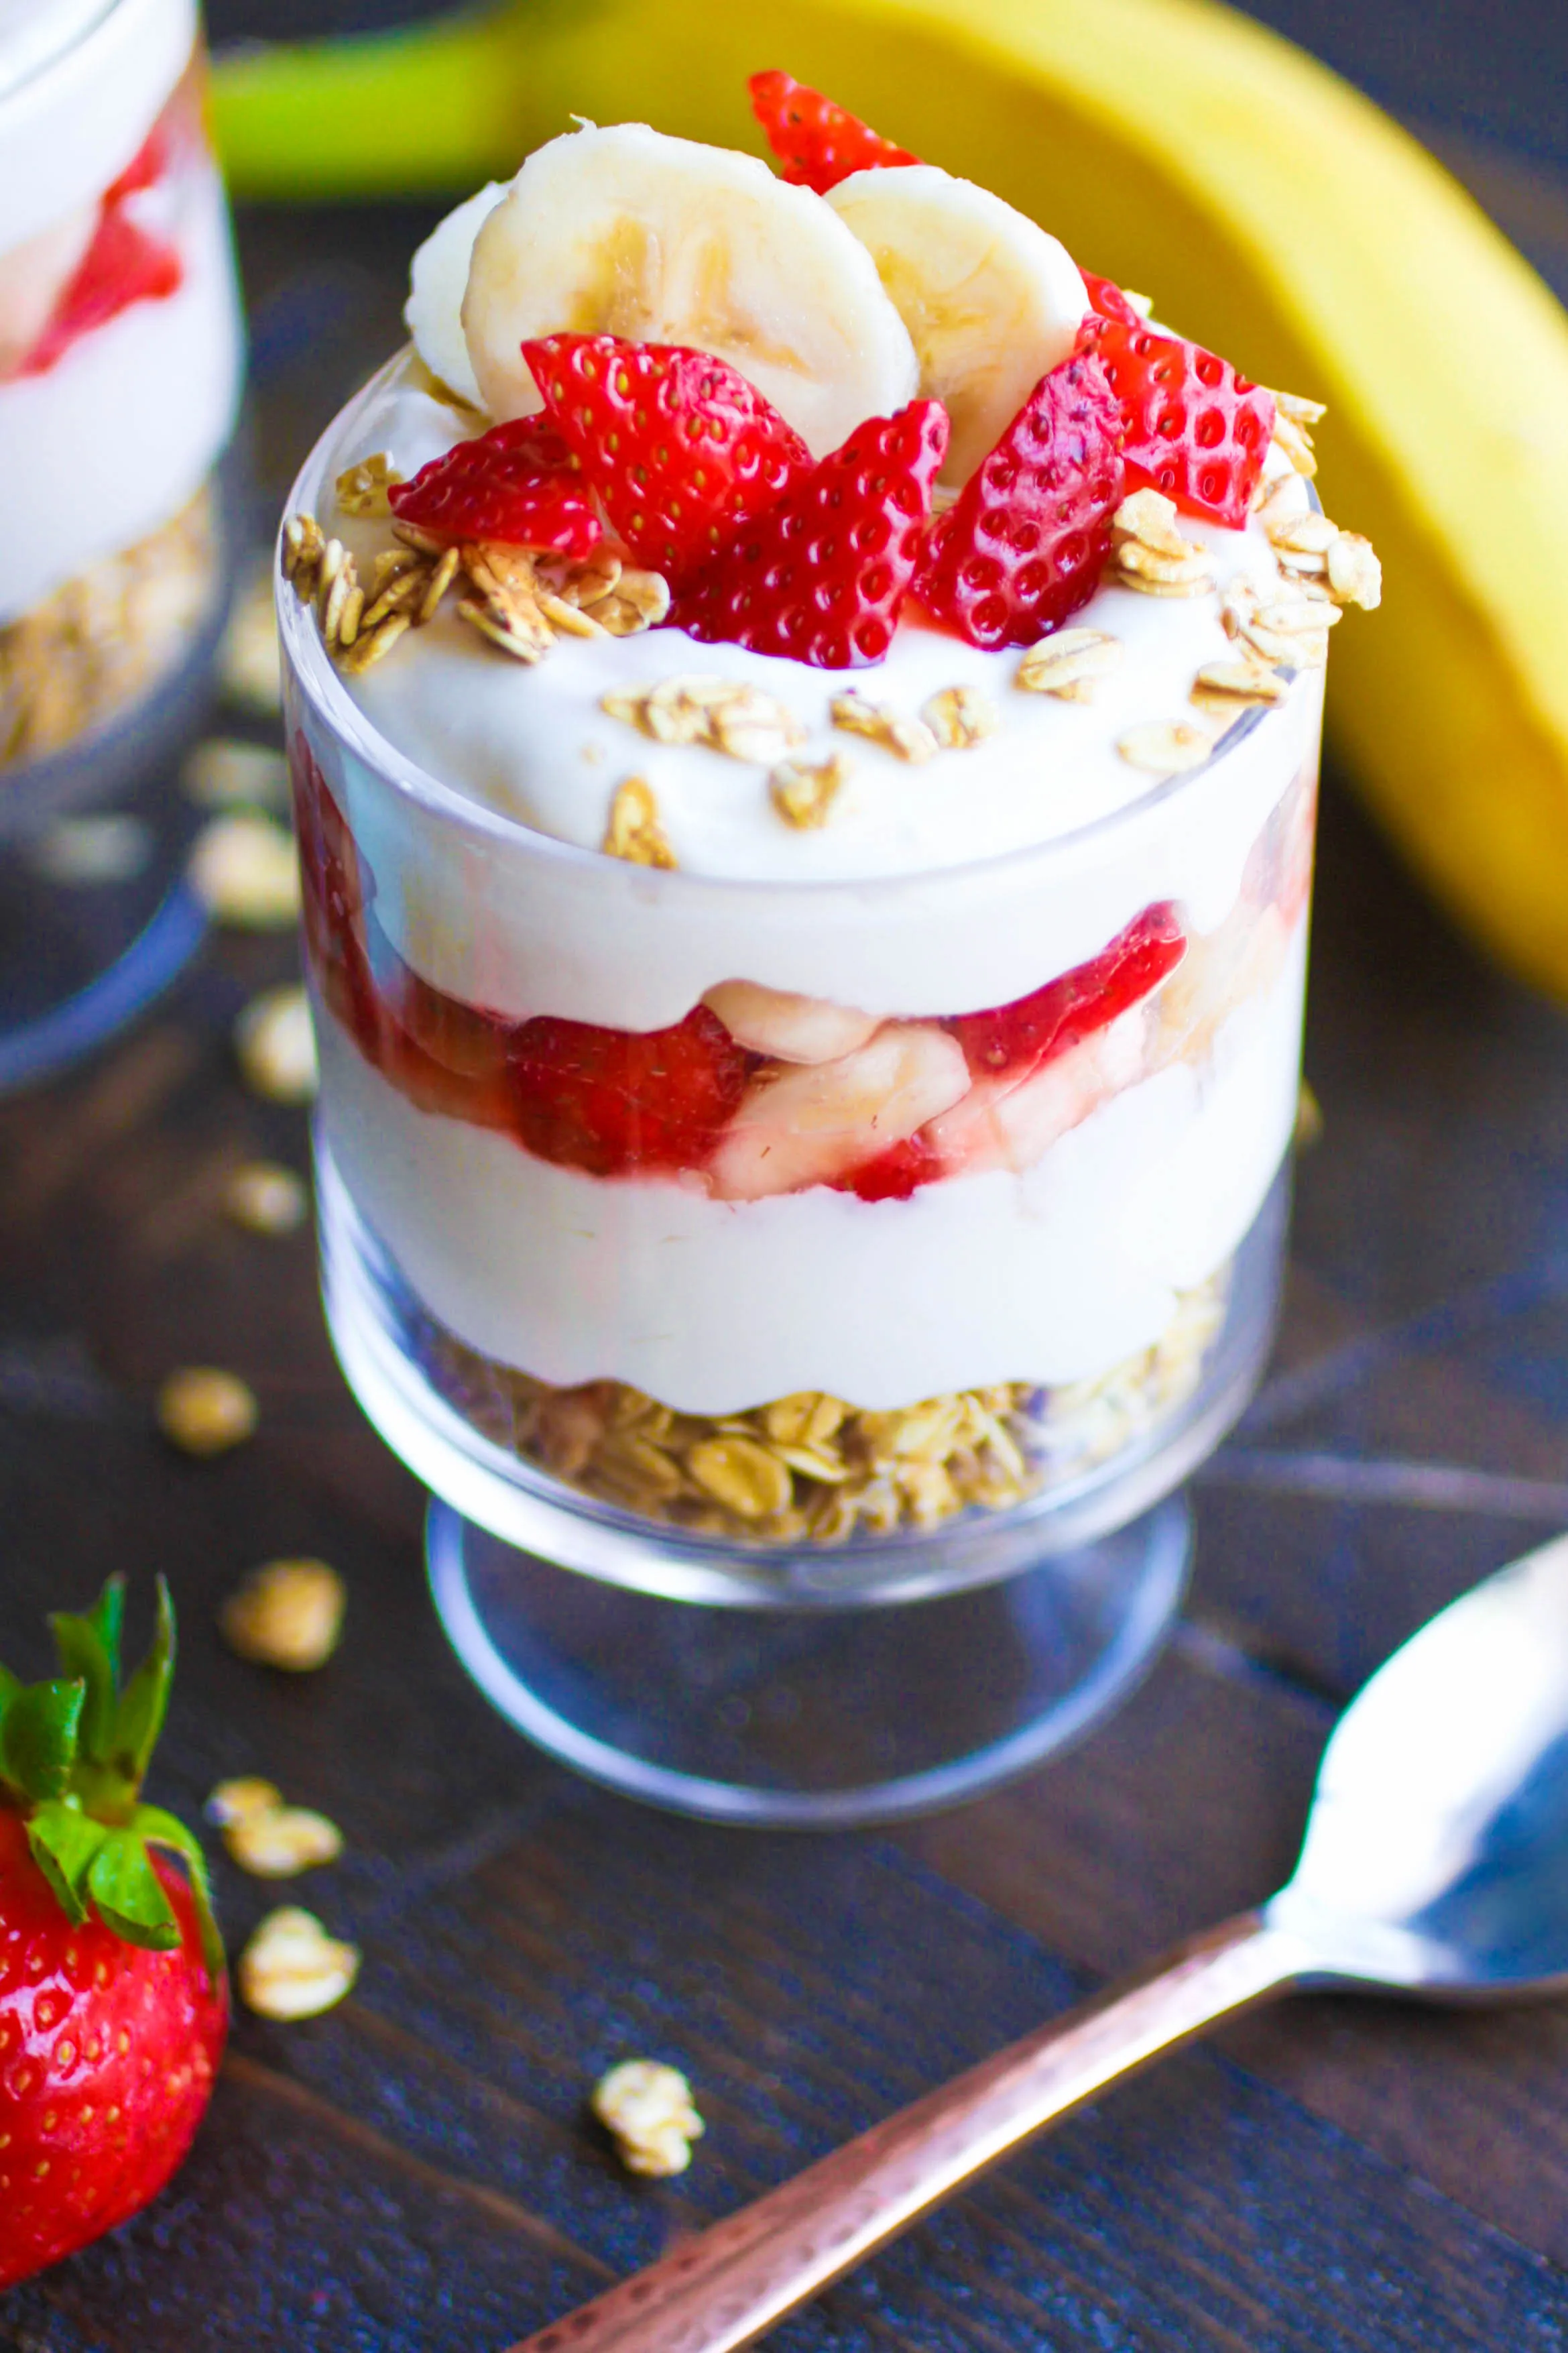 No Bake Strawberry-Banana Cheesecake Parfaits are the perfect treat for summer. No oven required!